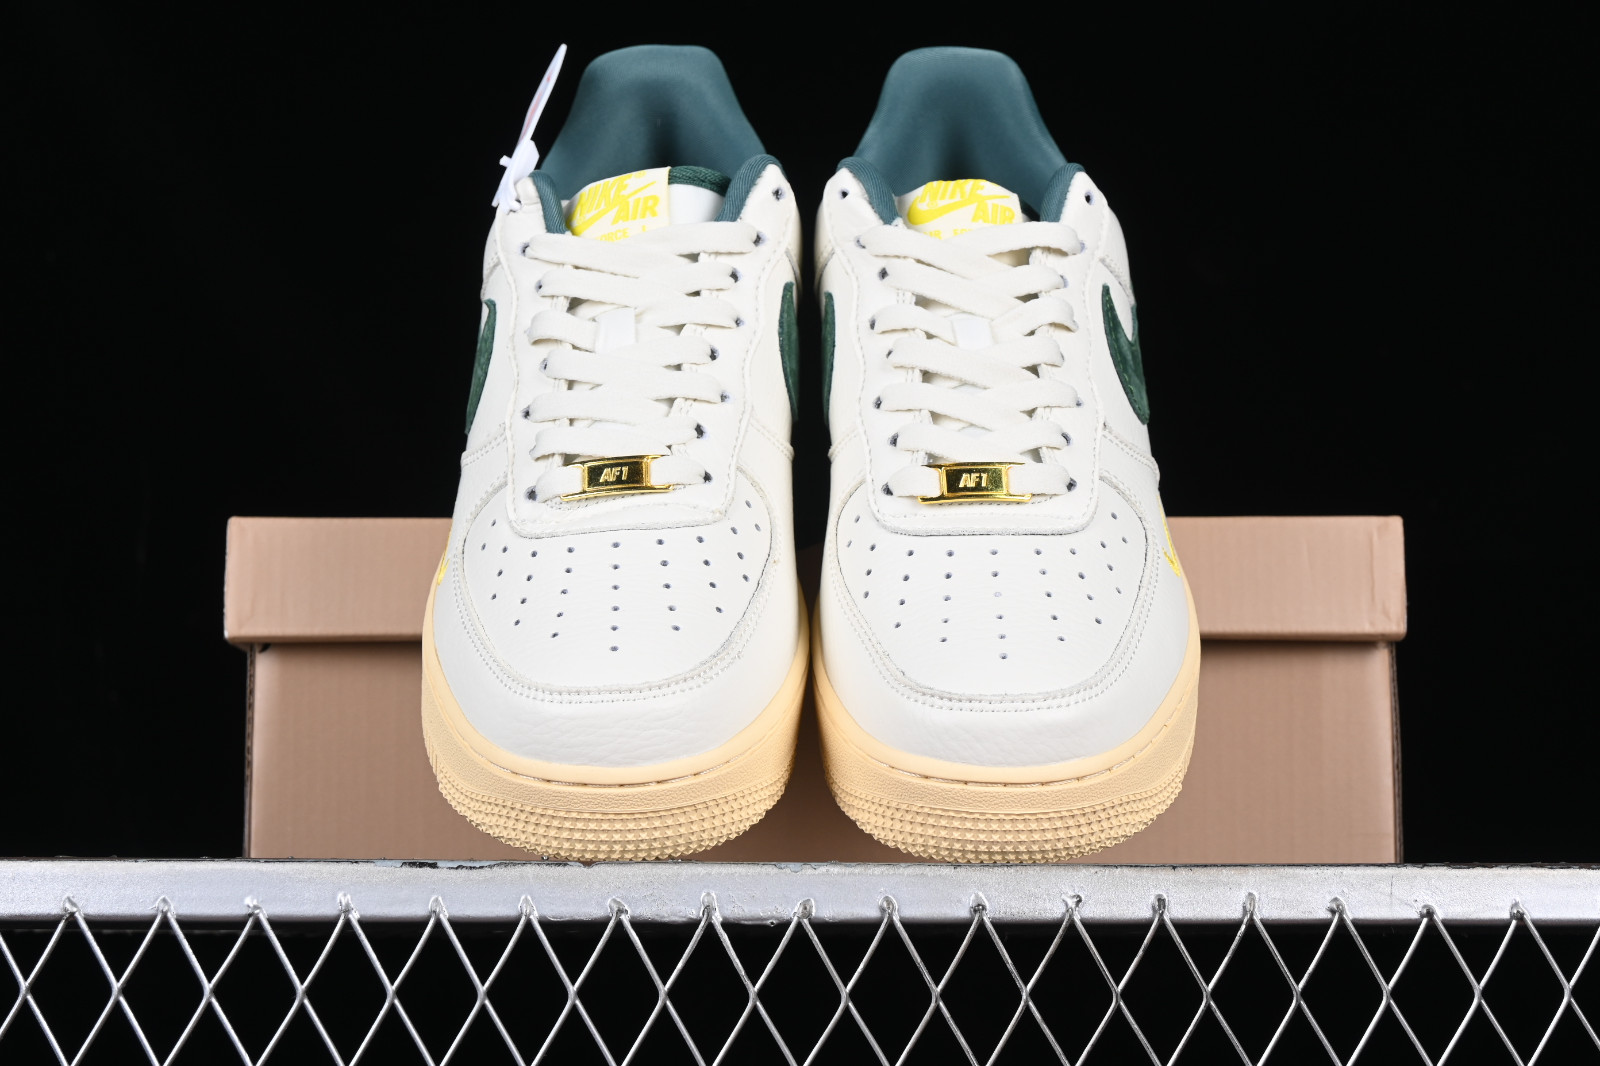 off-white x nike air force 1 On Sale - Authenticated Resale